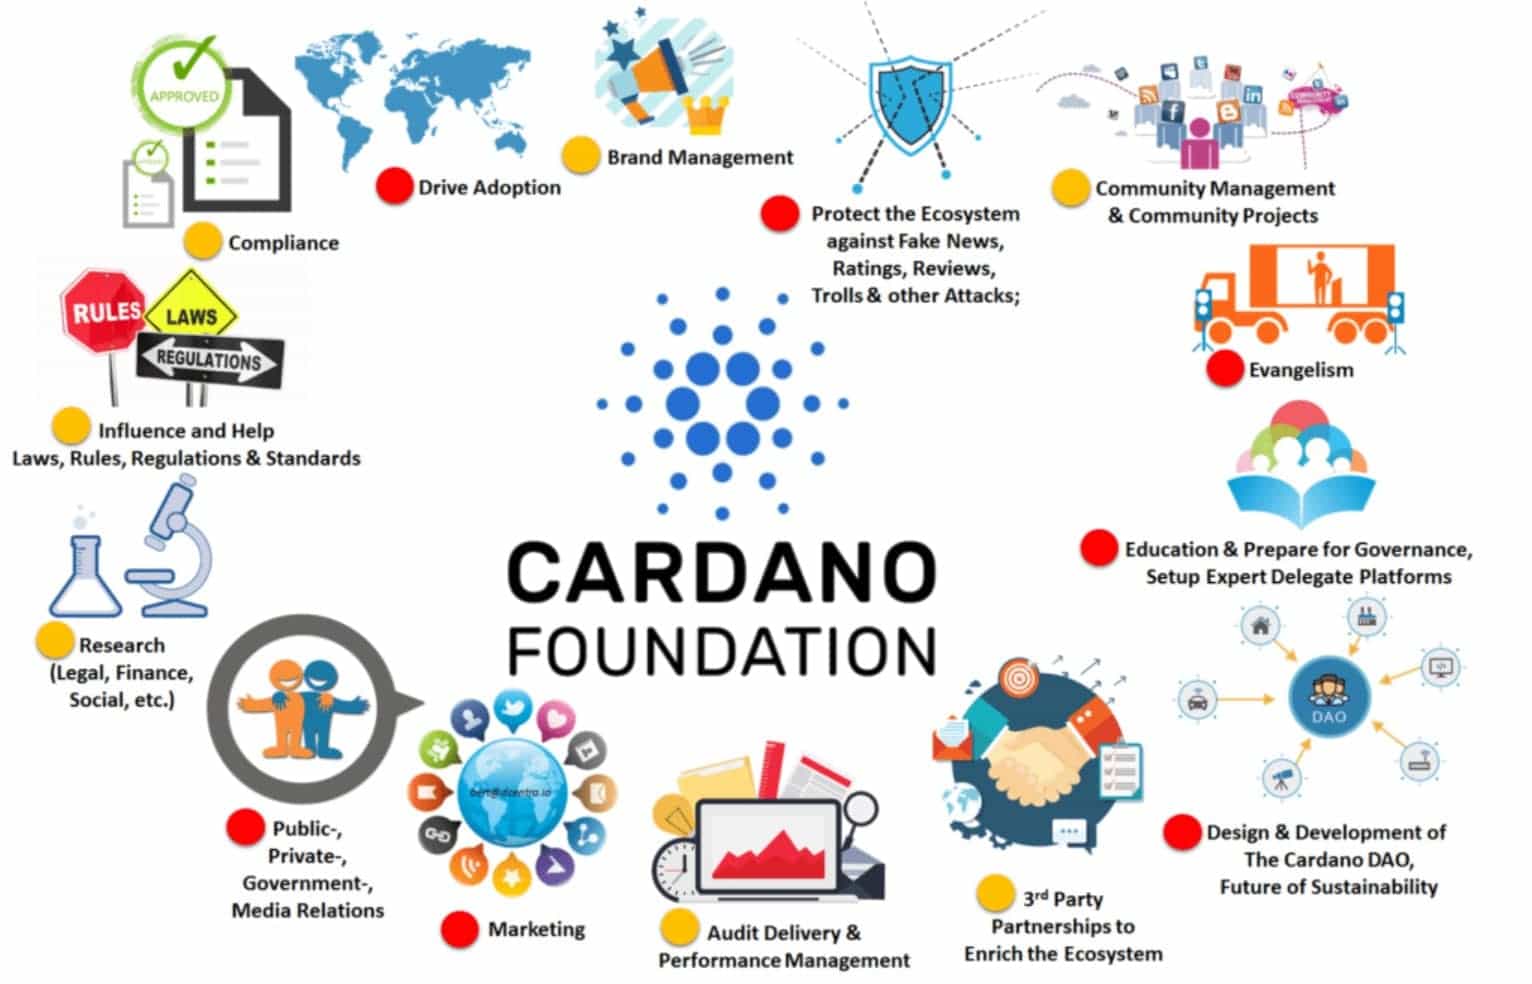 Cardano Foundation Overview